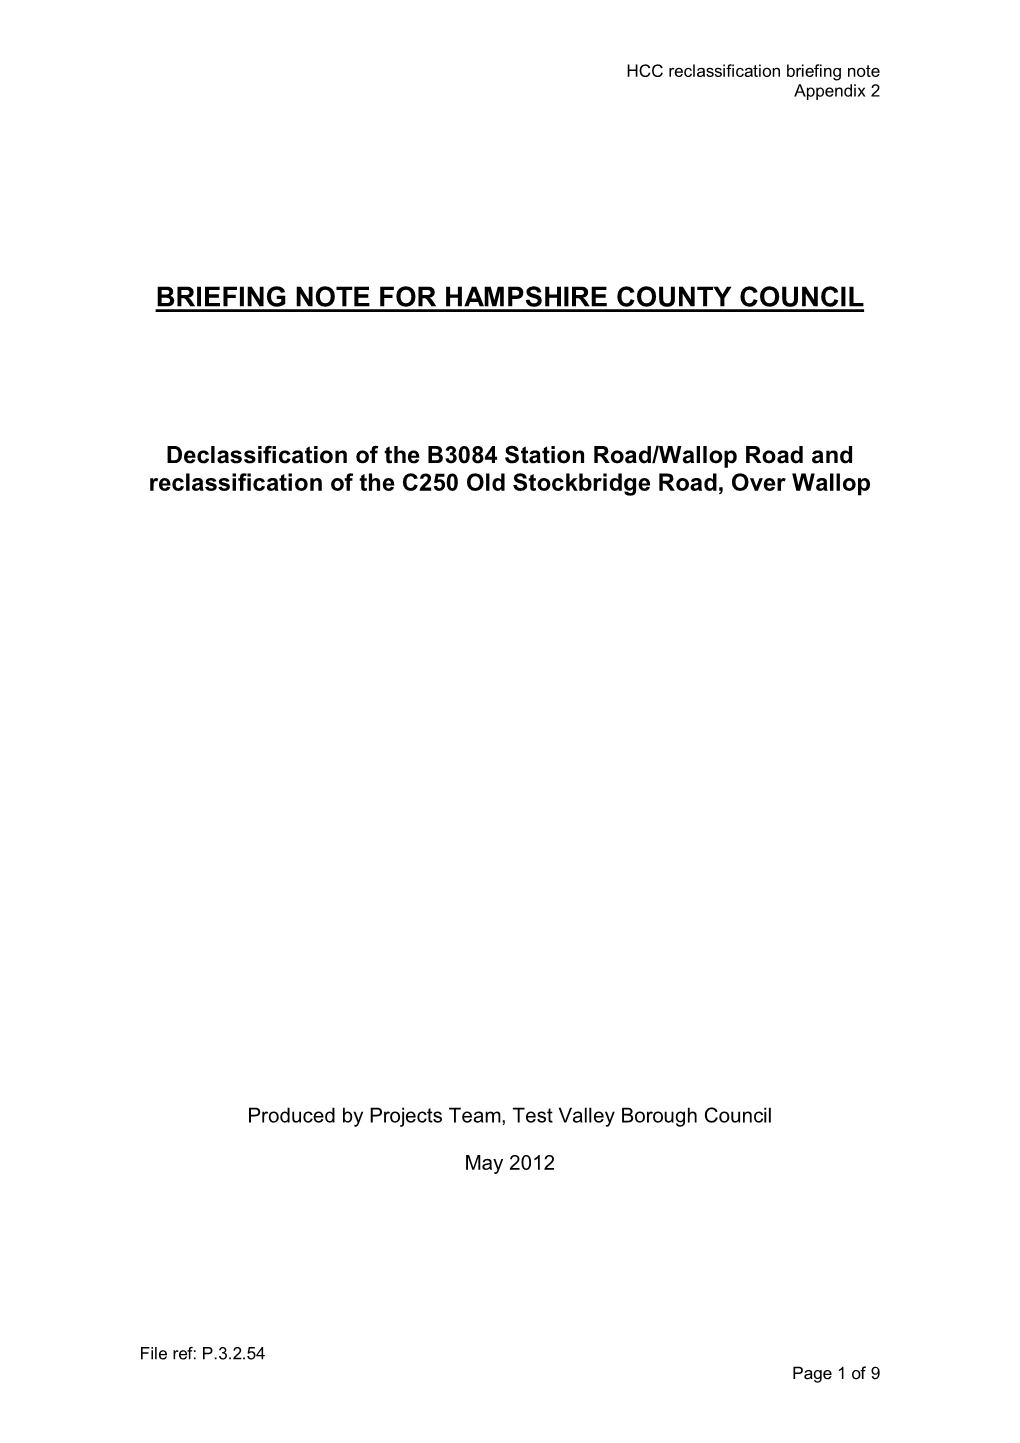 Briefing Note for Hampshire County Council